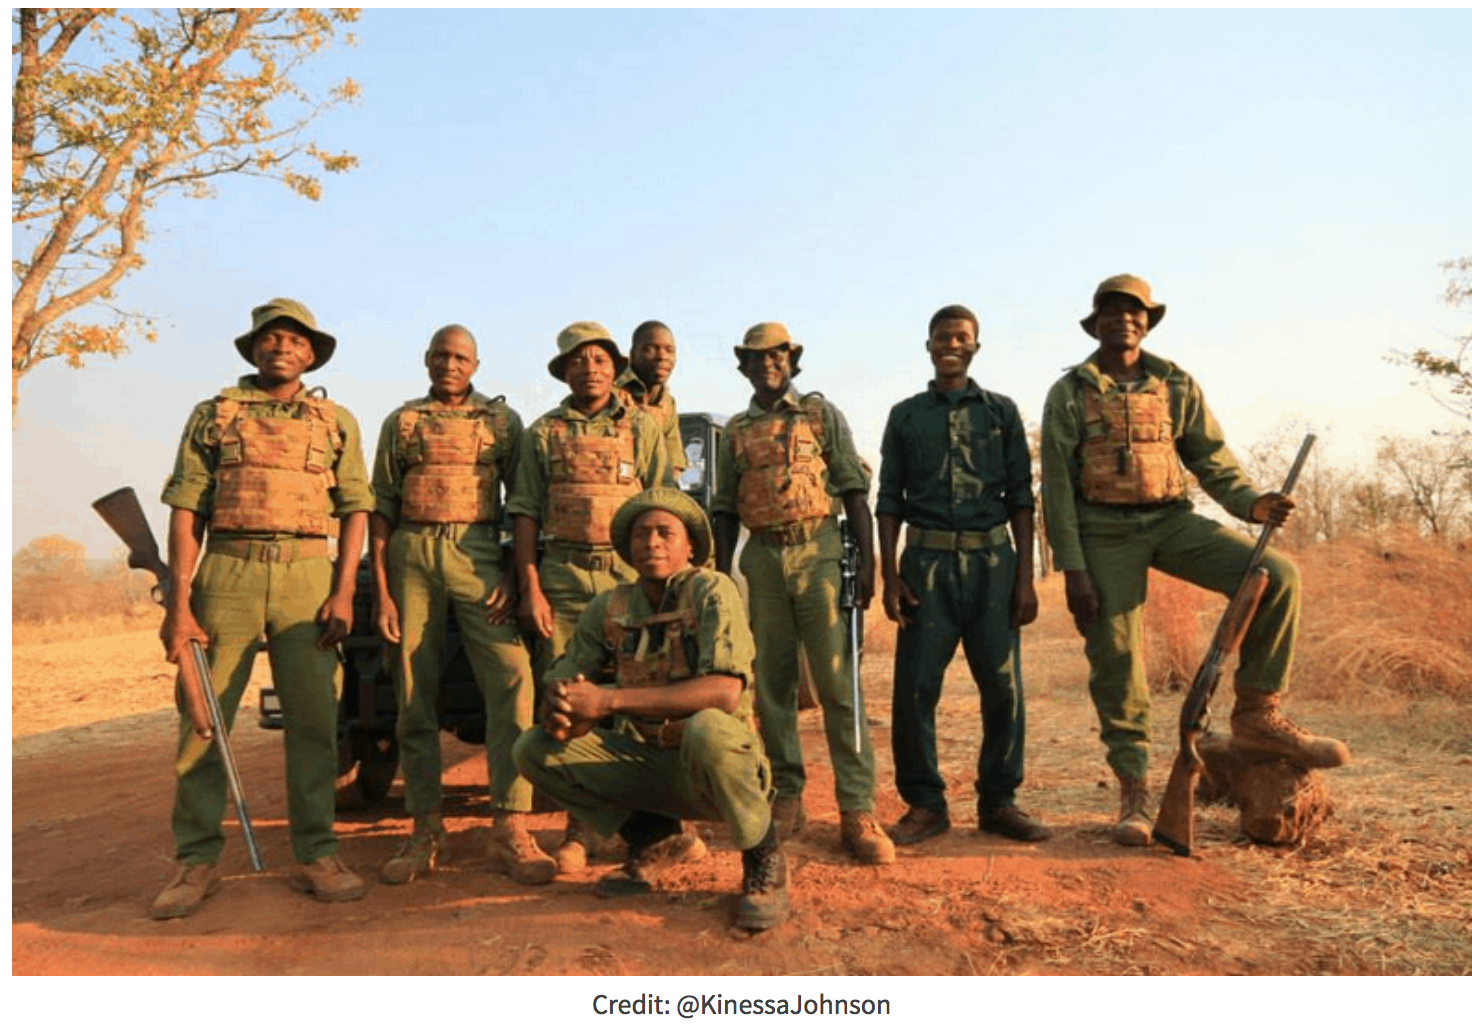 Meet The Women Who Track Down And Kills Poachers